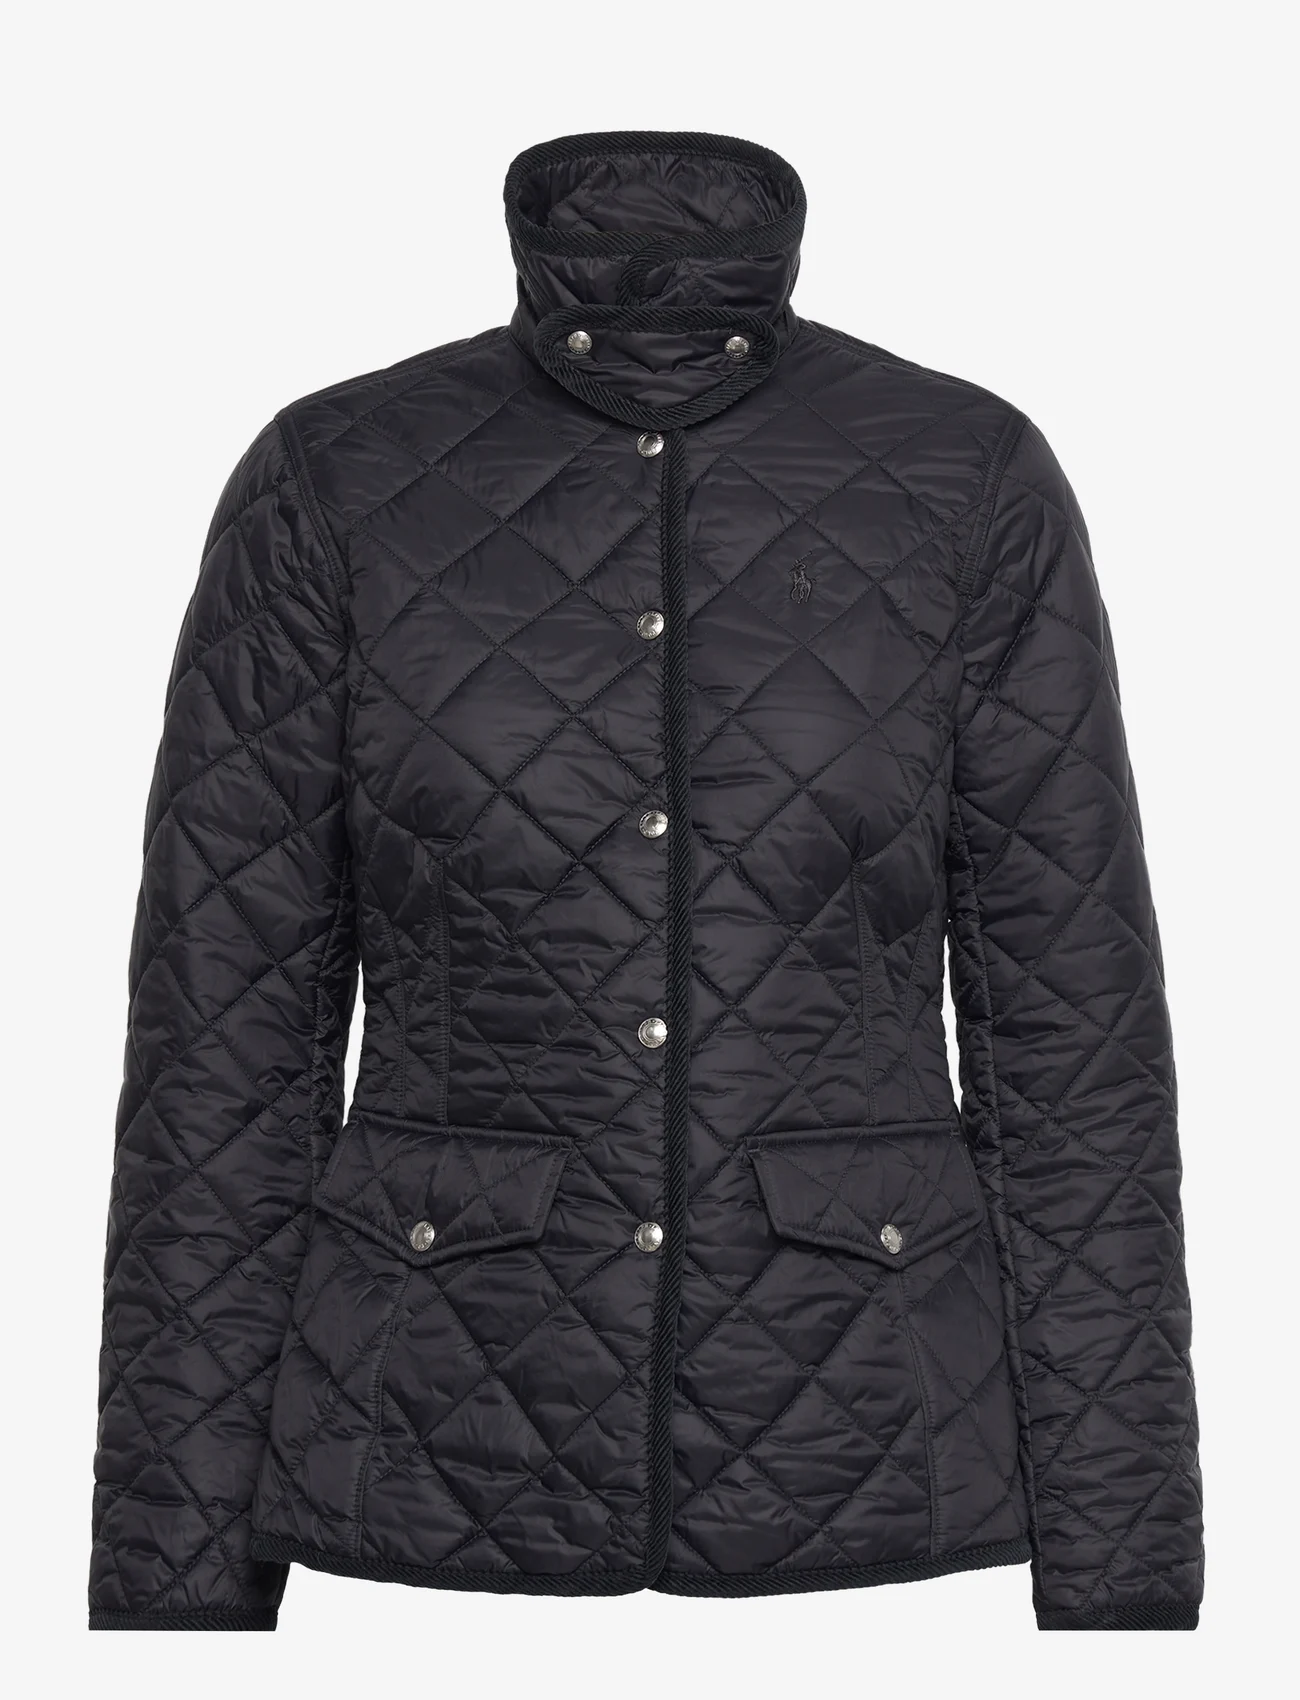 Polo Ralph Lauren - Quilted Jacket - kevadjakid - polo black - 0